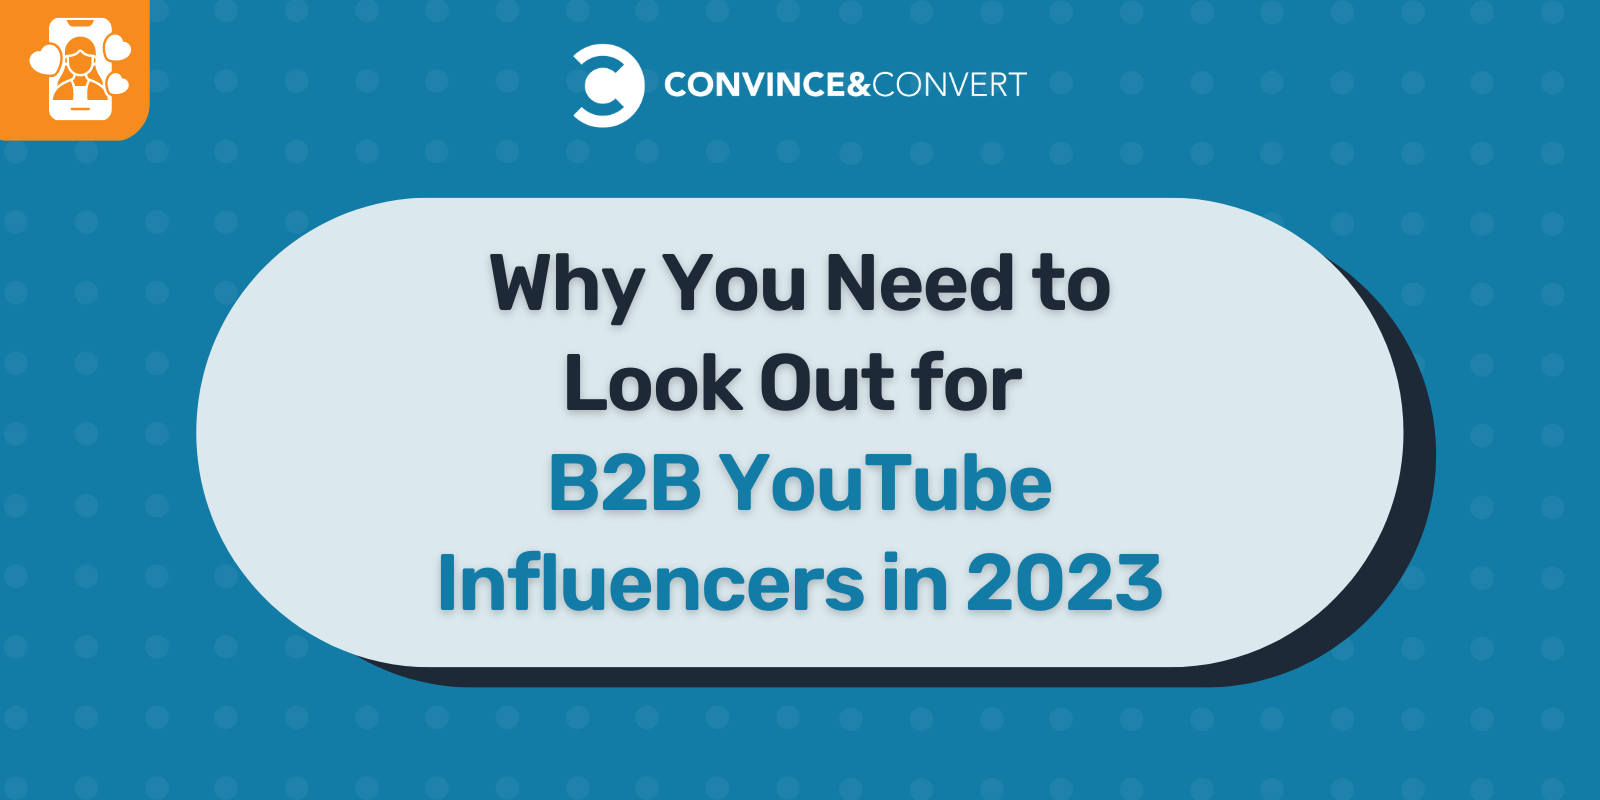 Why You Need to Look Out for B2B YouTube Influencers in 2023